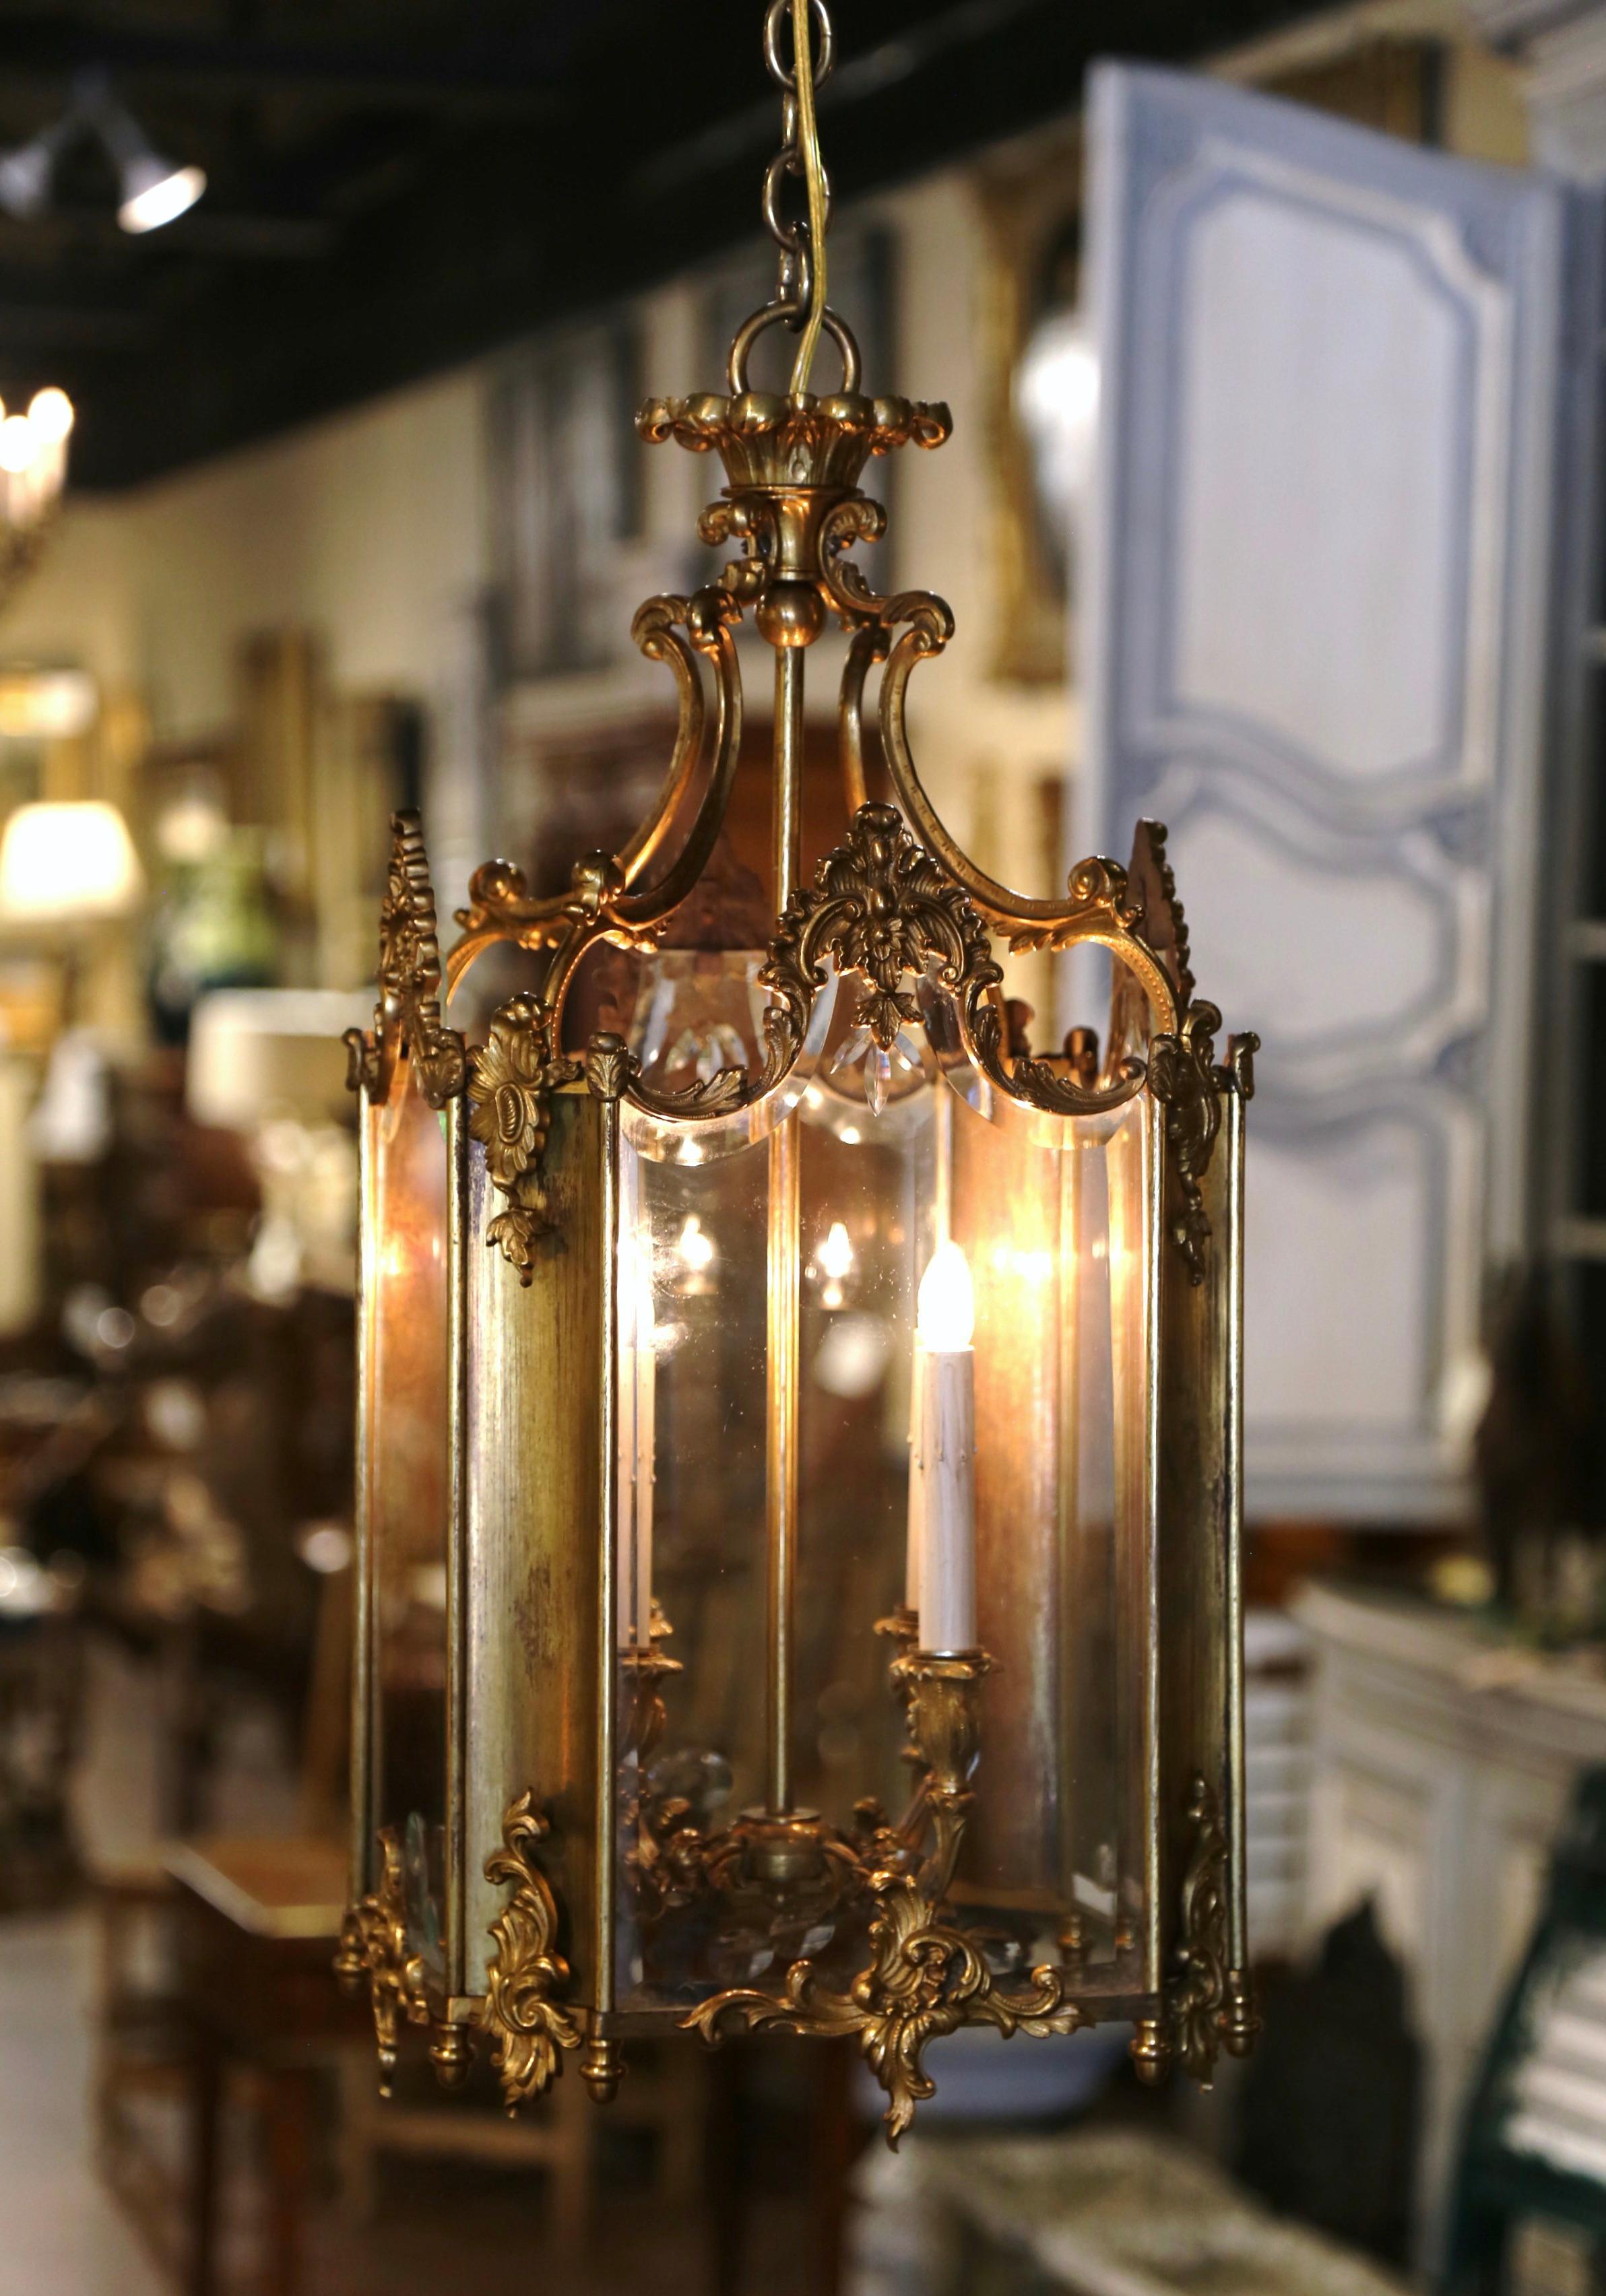 Make a statement in your entryway or powder room with this elegant Napoleon III bronze dore fixture. Crafted in France, circa 1870, and square in shape, the antique lantern features a top crown decorated with scroll and acanthus leaf decor; the